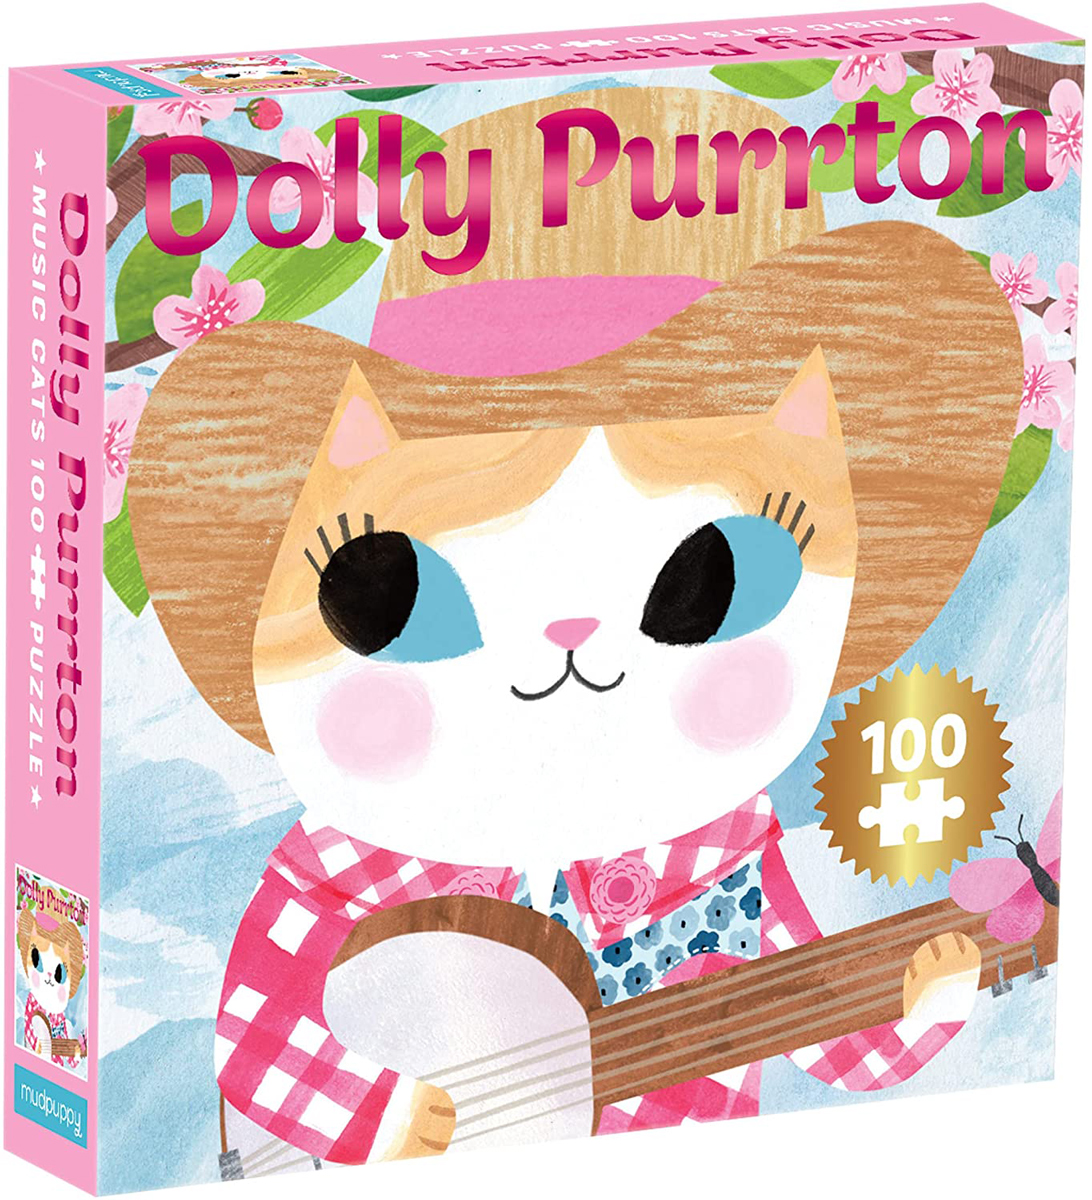 Dolly Purrton Music Cats Puzzle